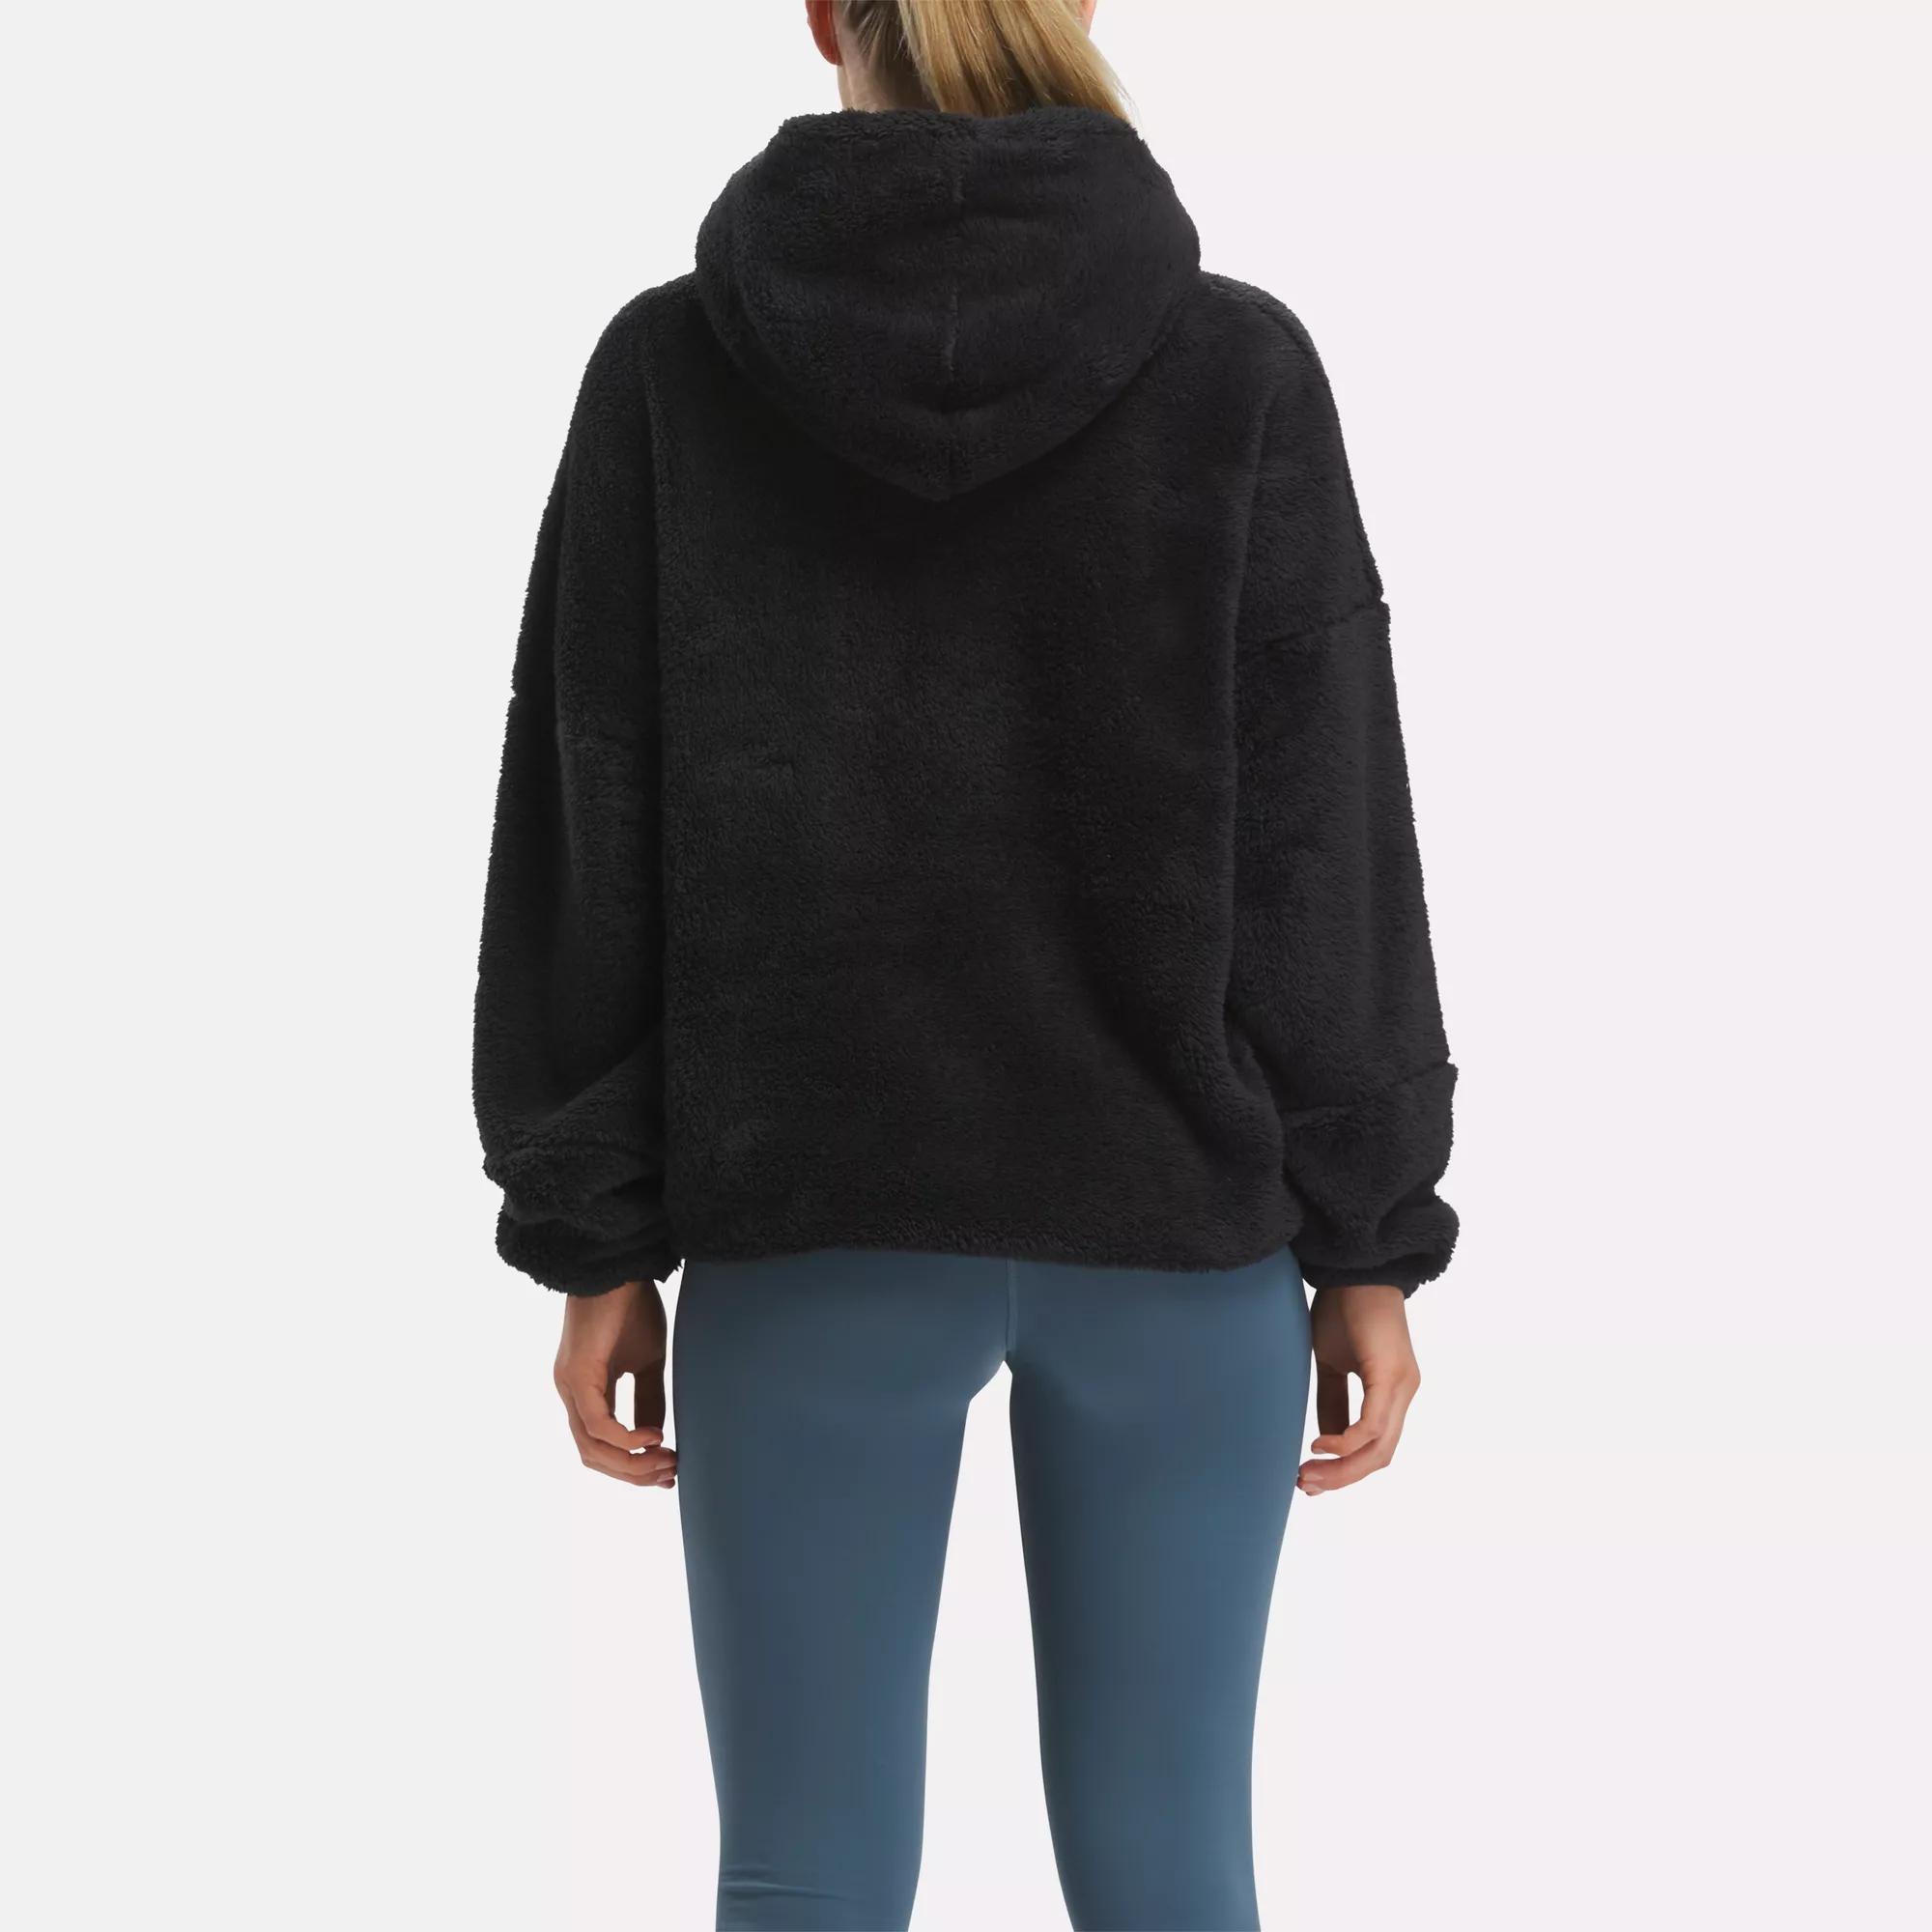 Cozy Escape Hooded Pullover Set - Slate Blue 1X